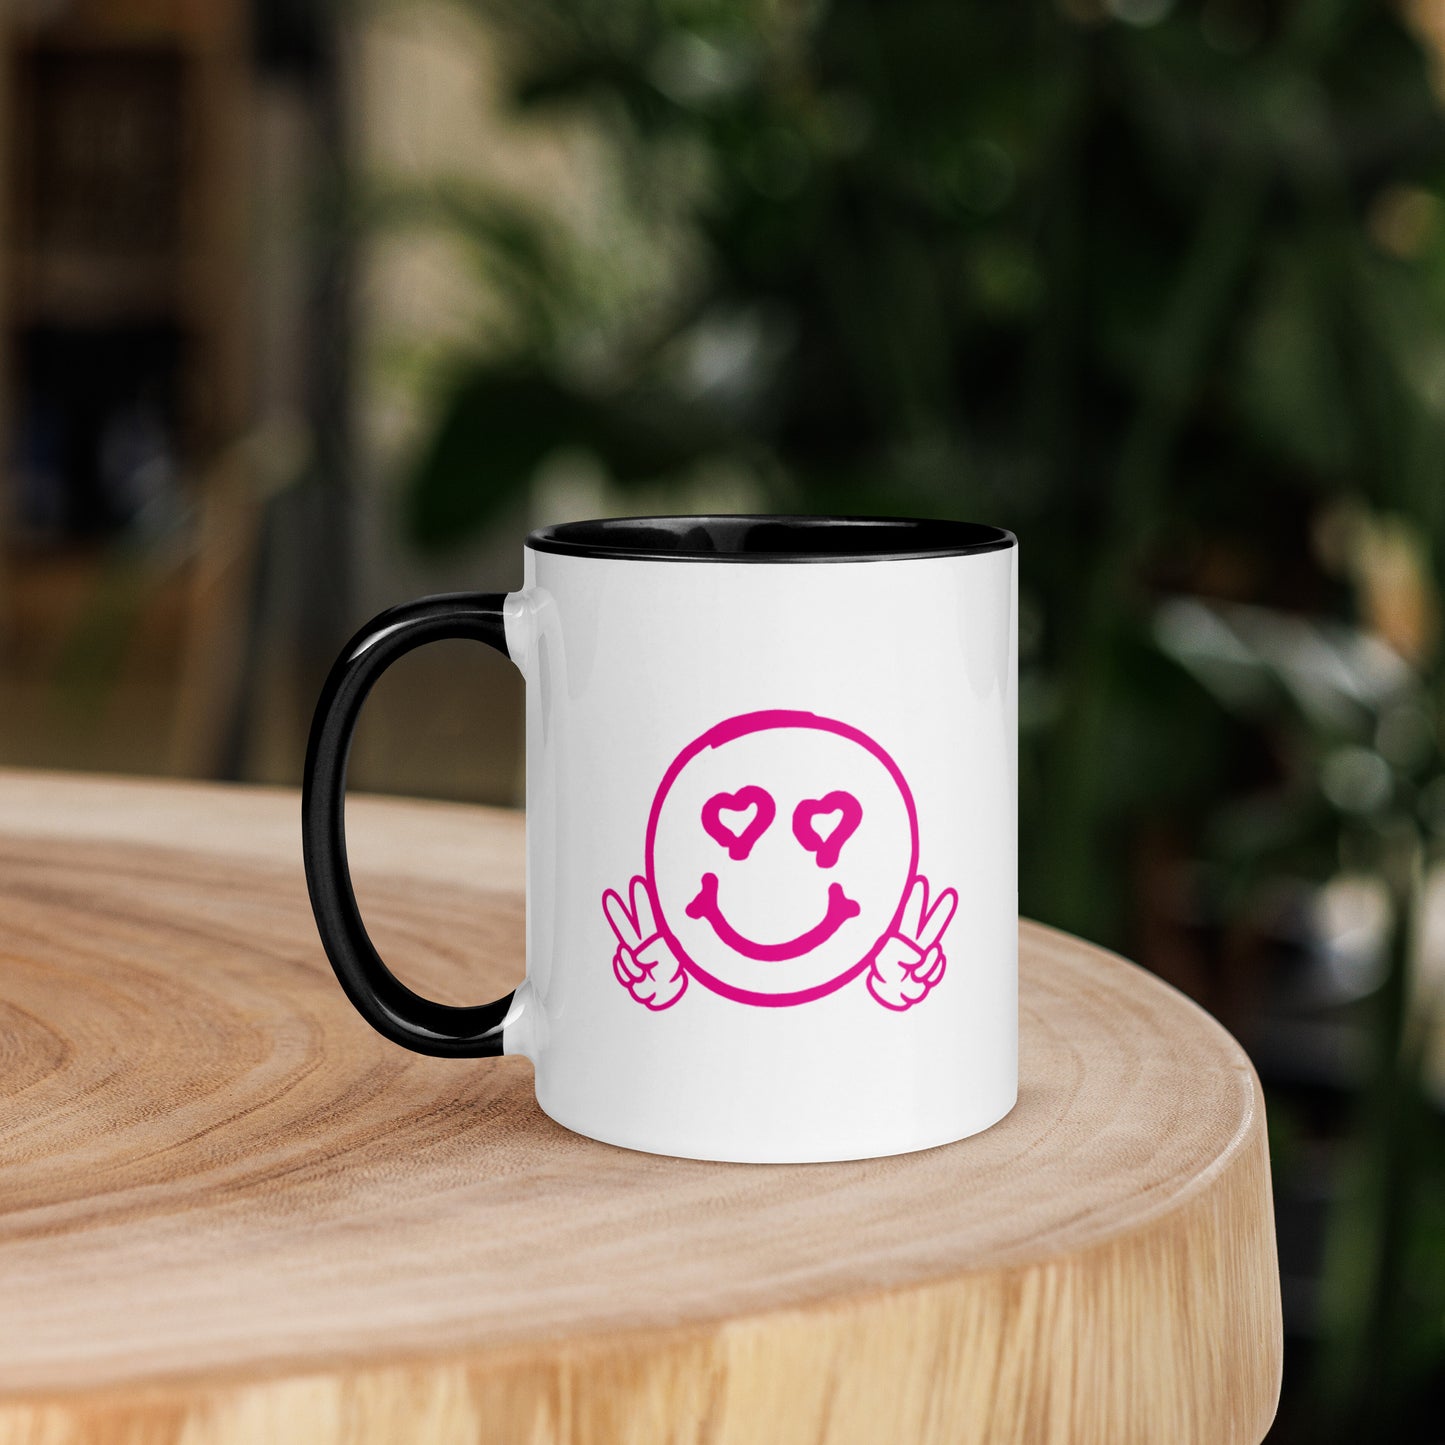 Hot Pink Smiley Face, and Have A Good Day, White Mug with Color Inside